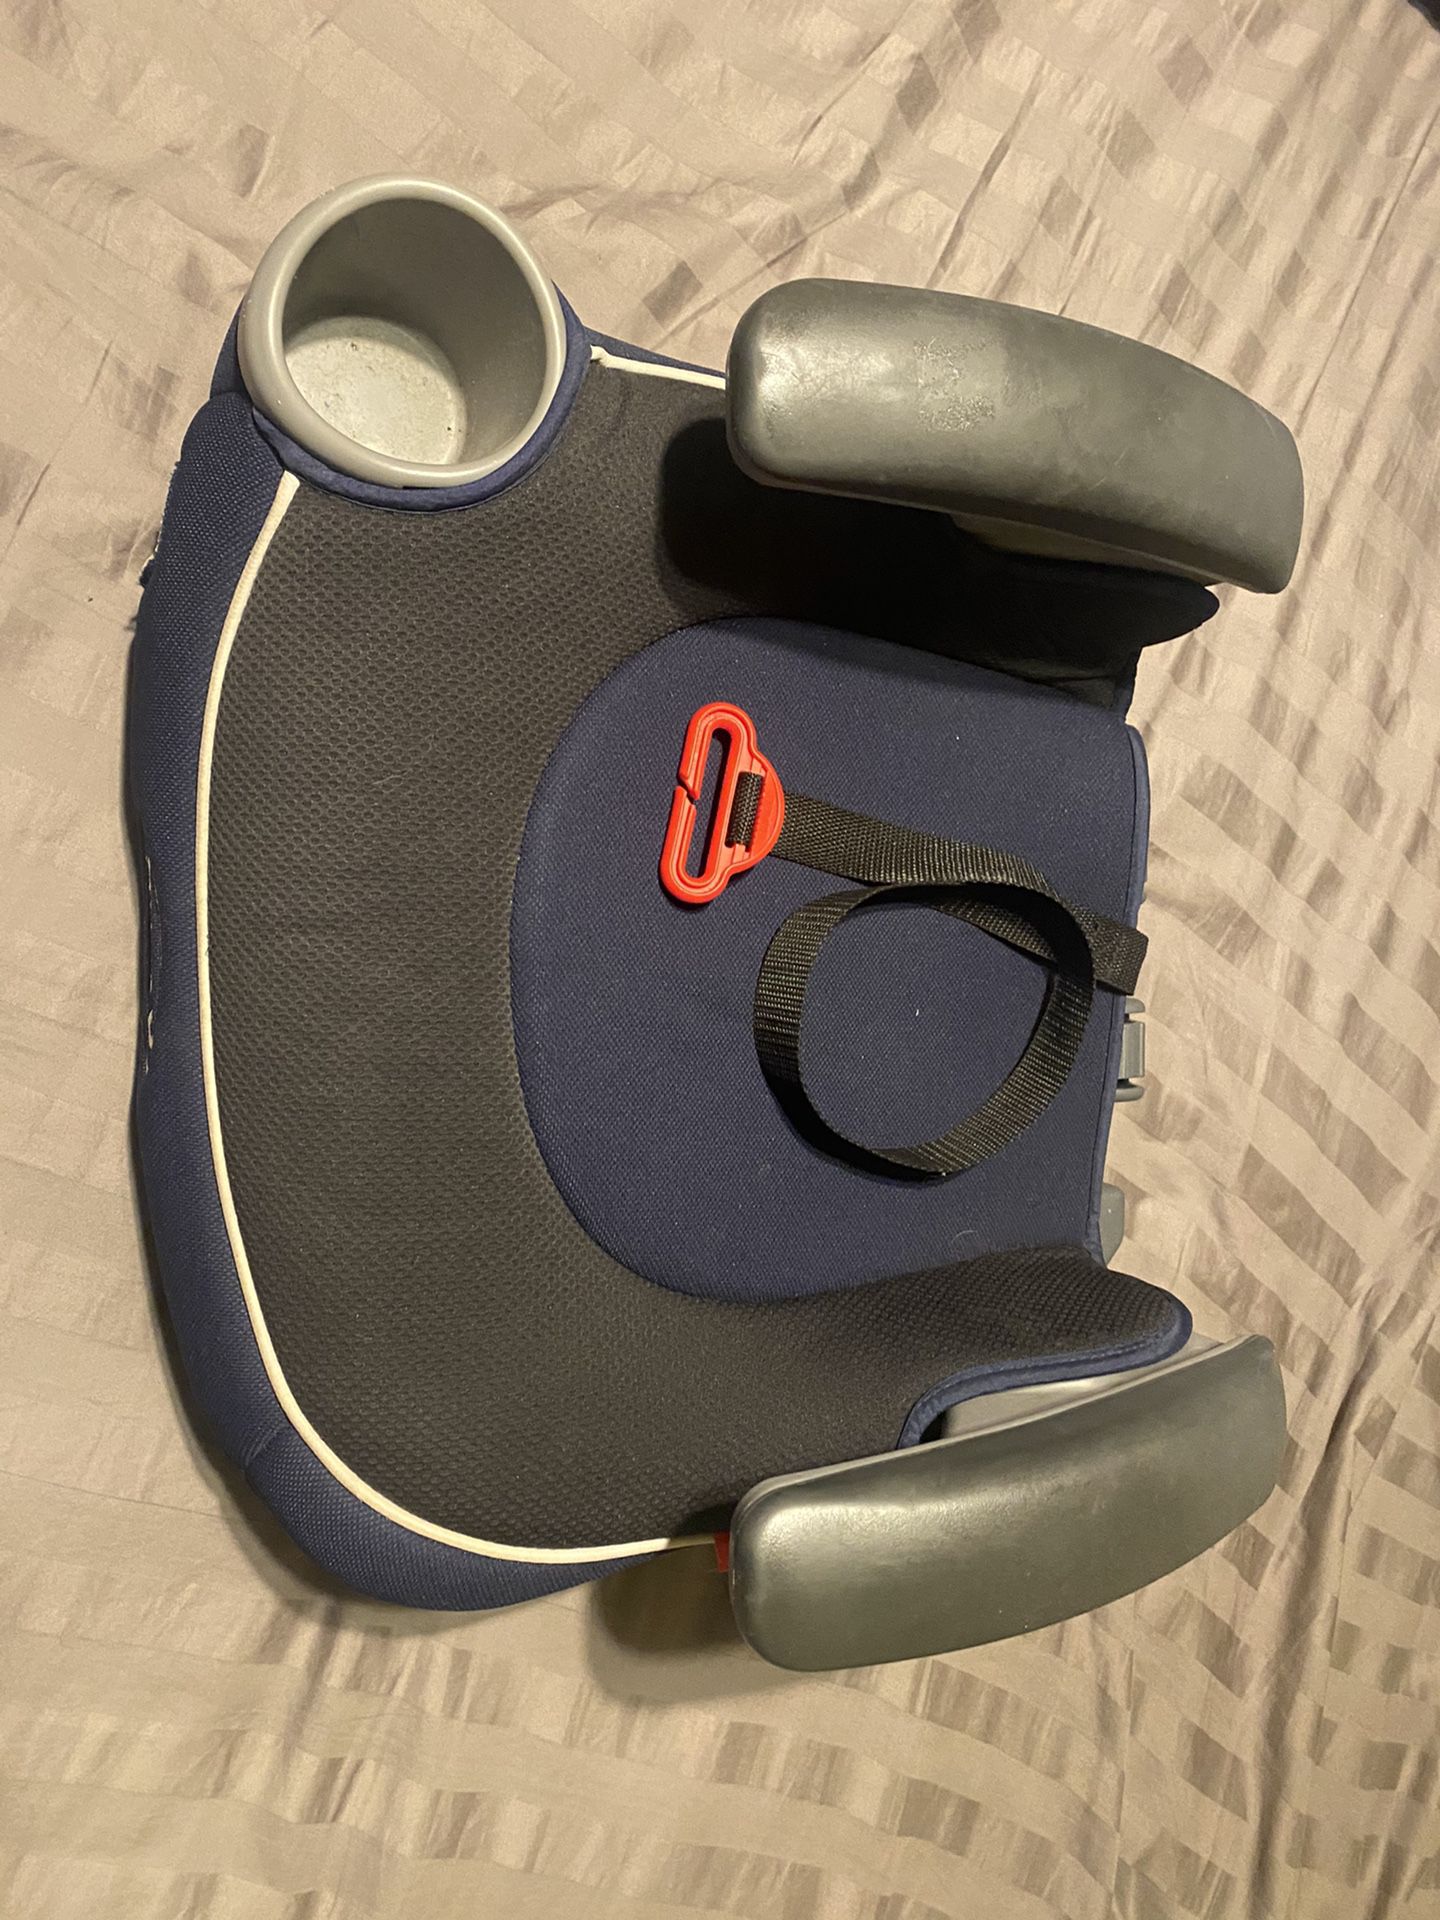 Graco Child Booster Seat